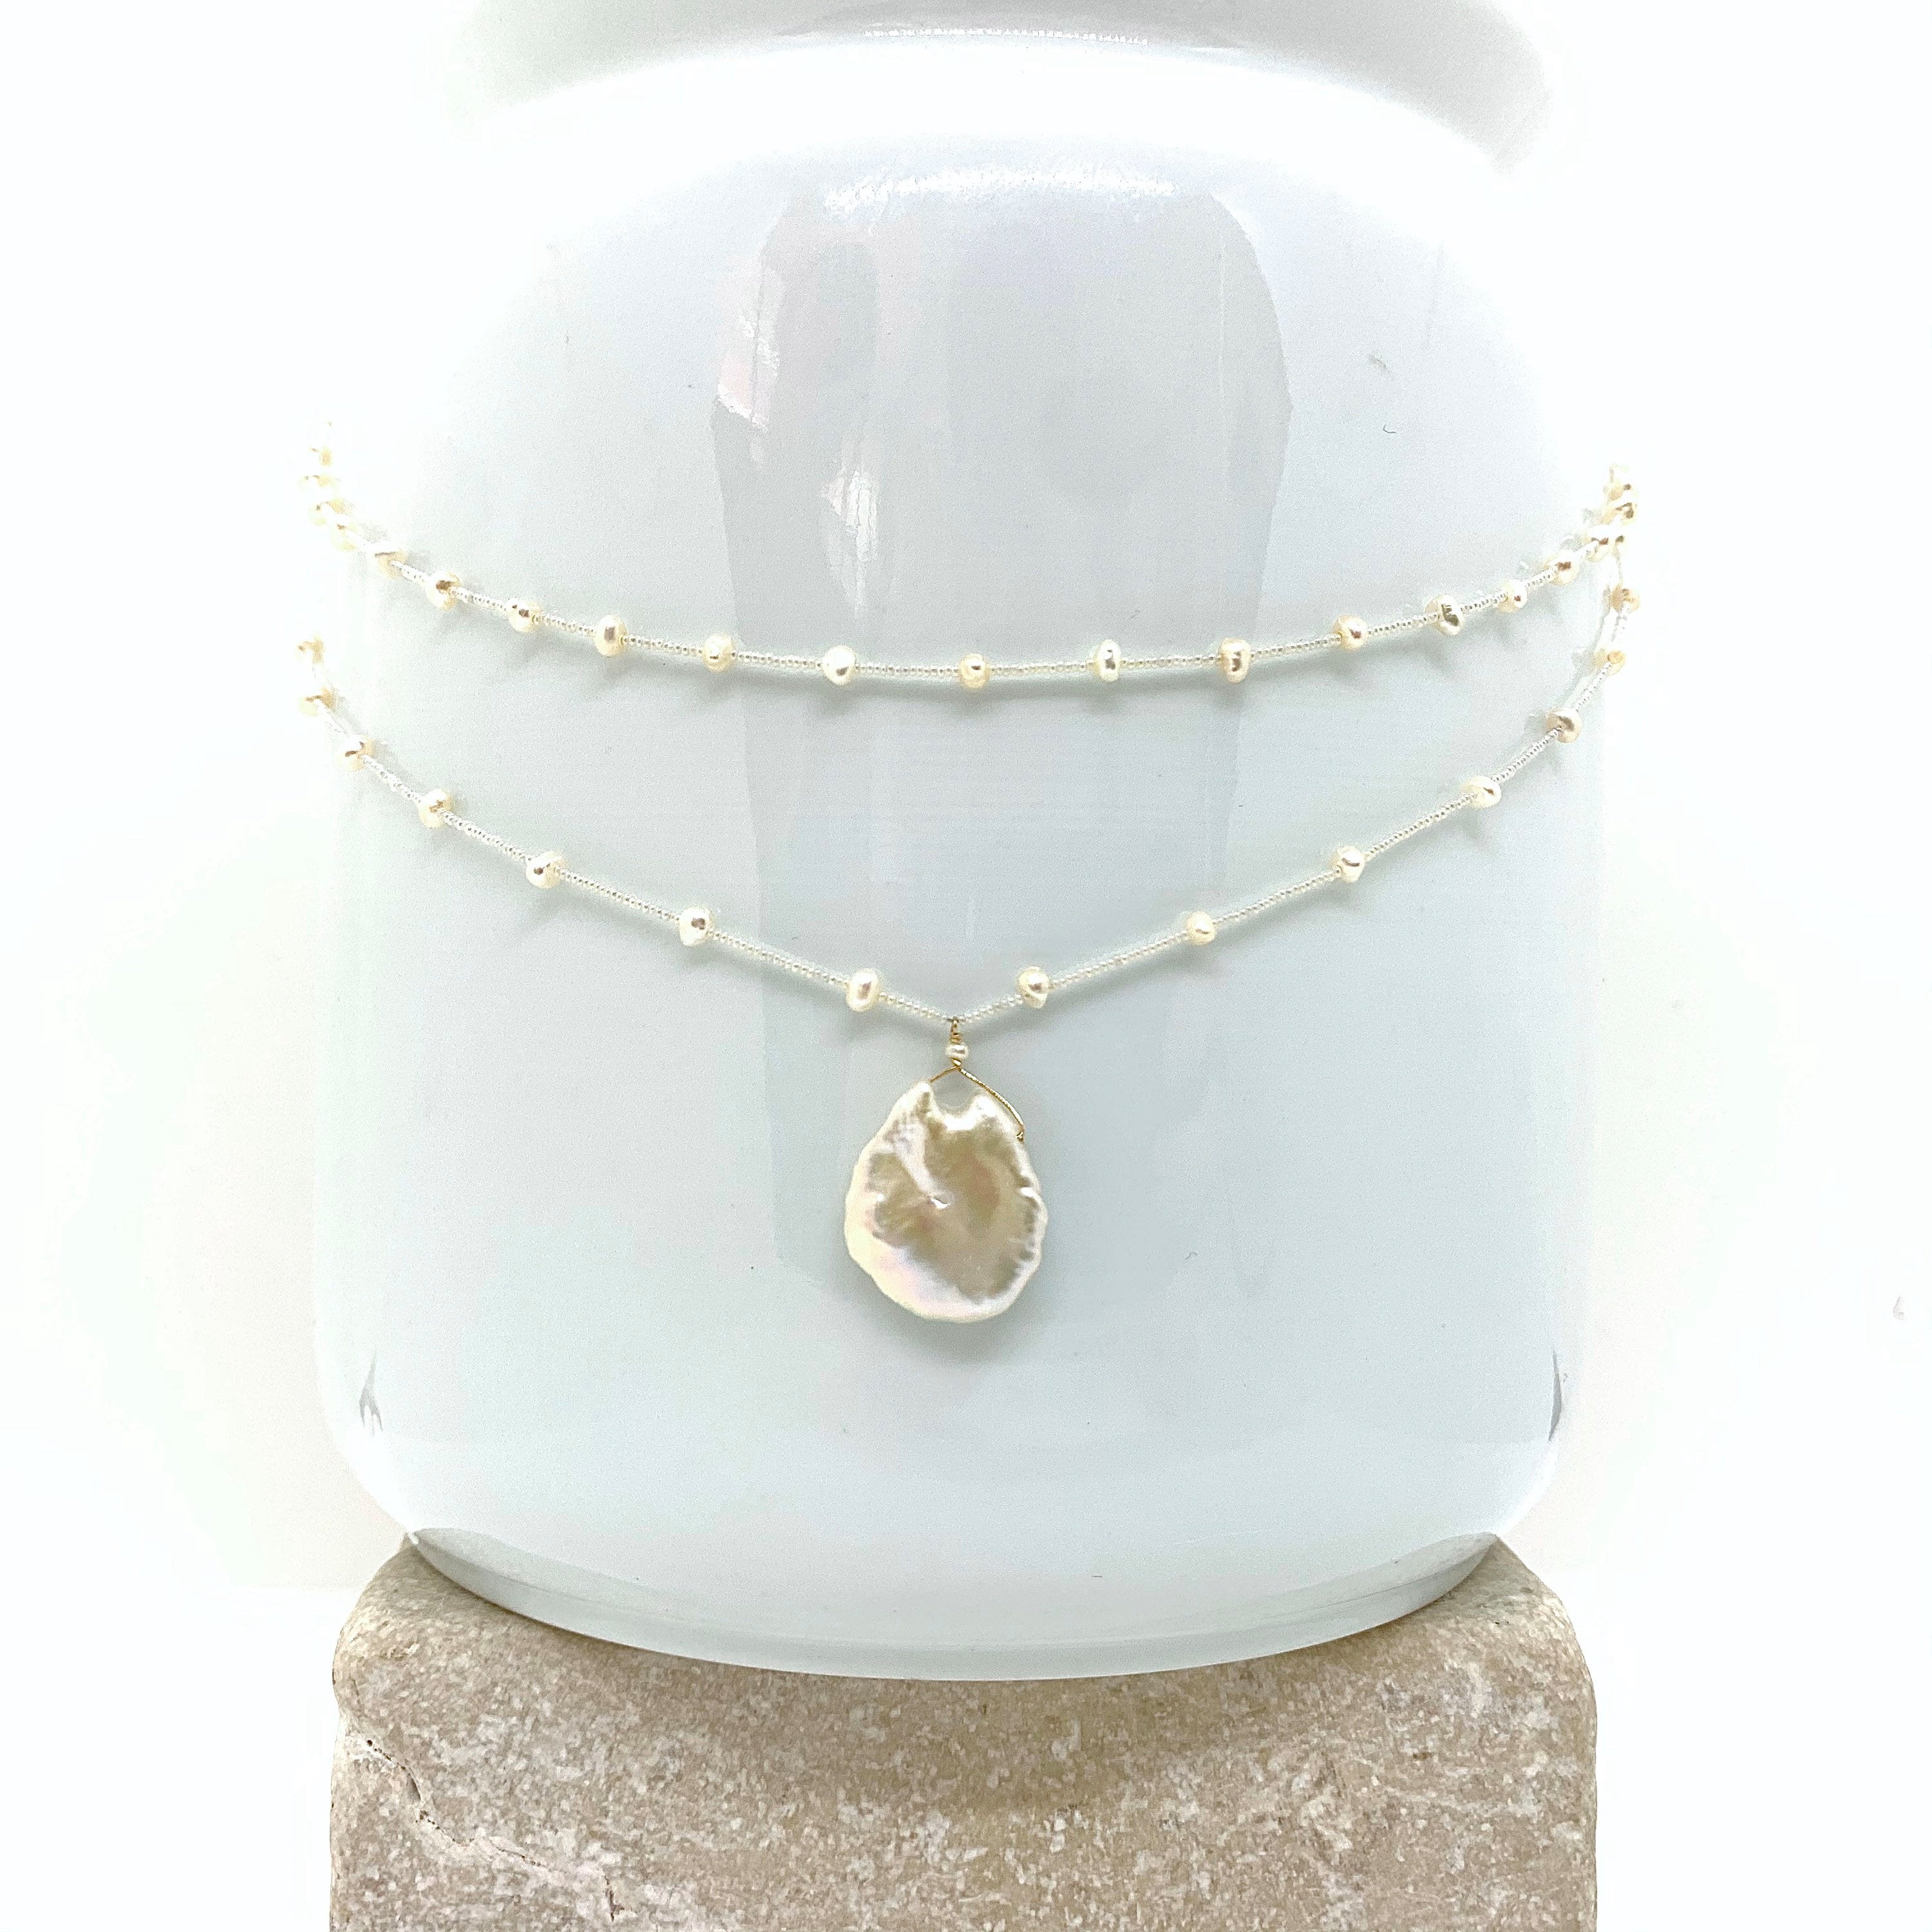 14k Gold Chain Necklace w/ Freshwater Pearls & Antique Italian Beads